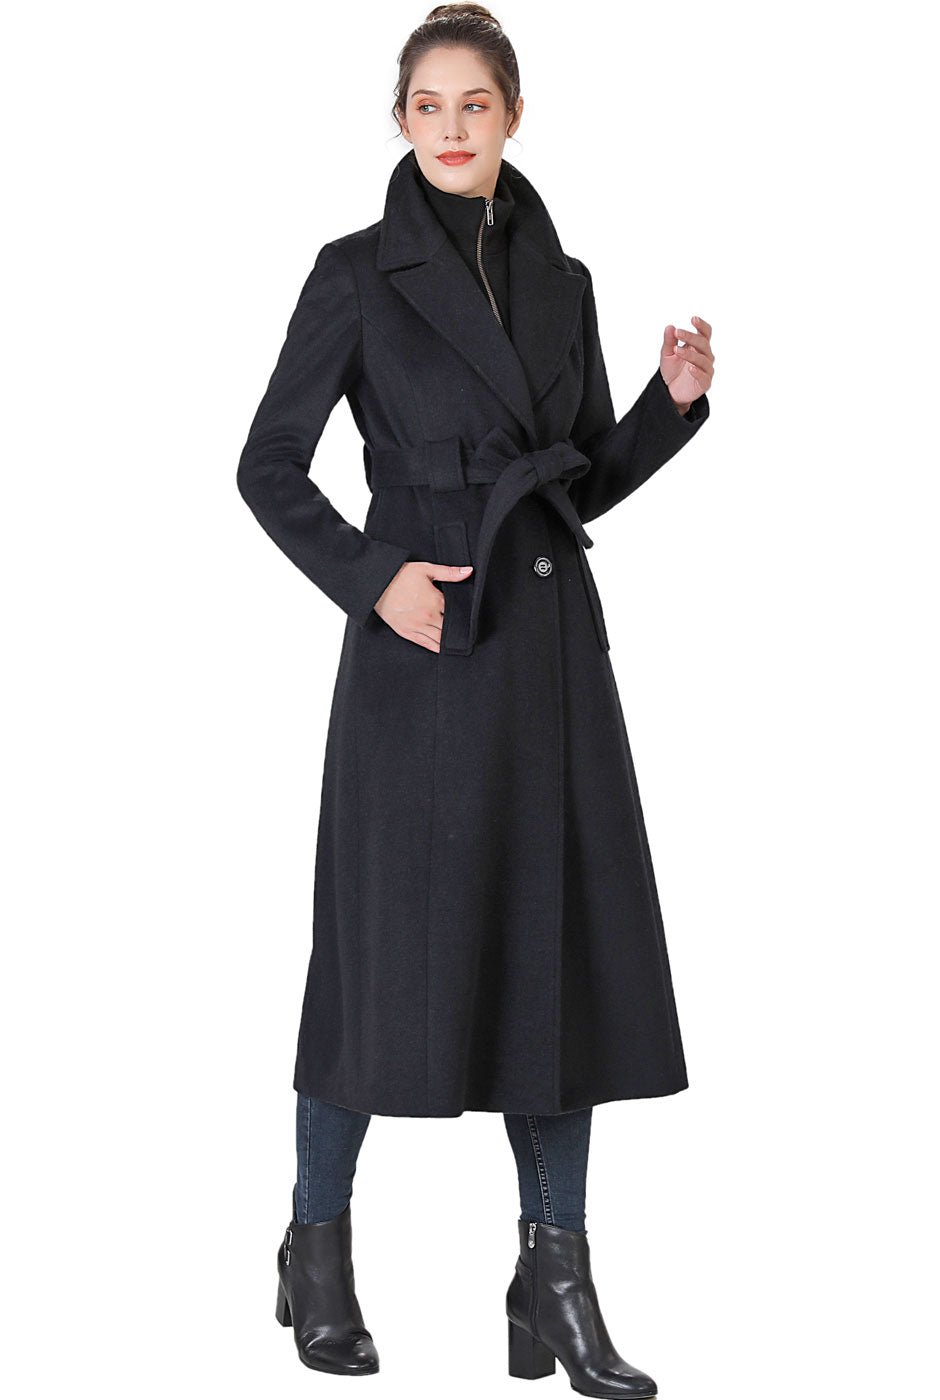 BGSD Women May Belted Wrap Wool Trench Coat